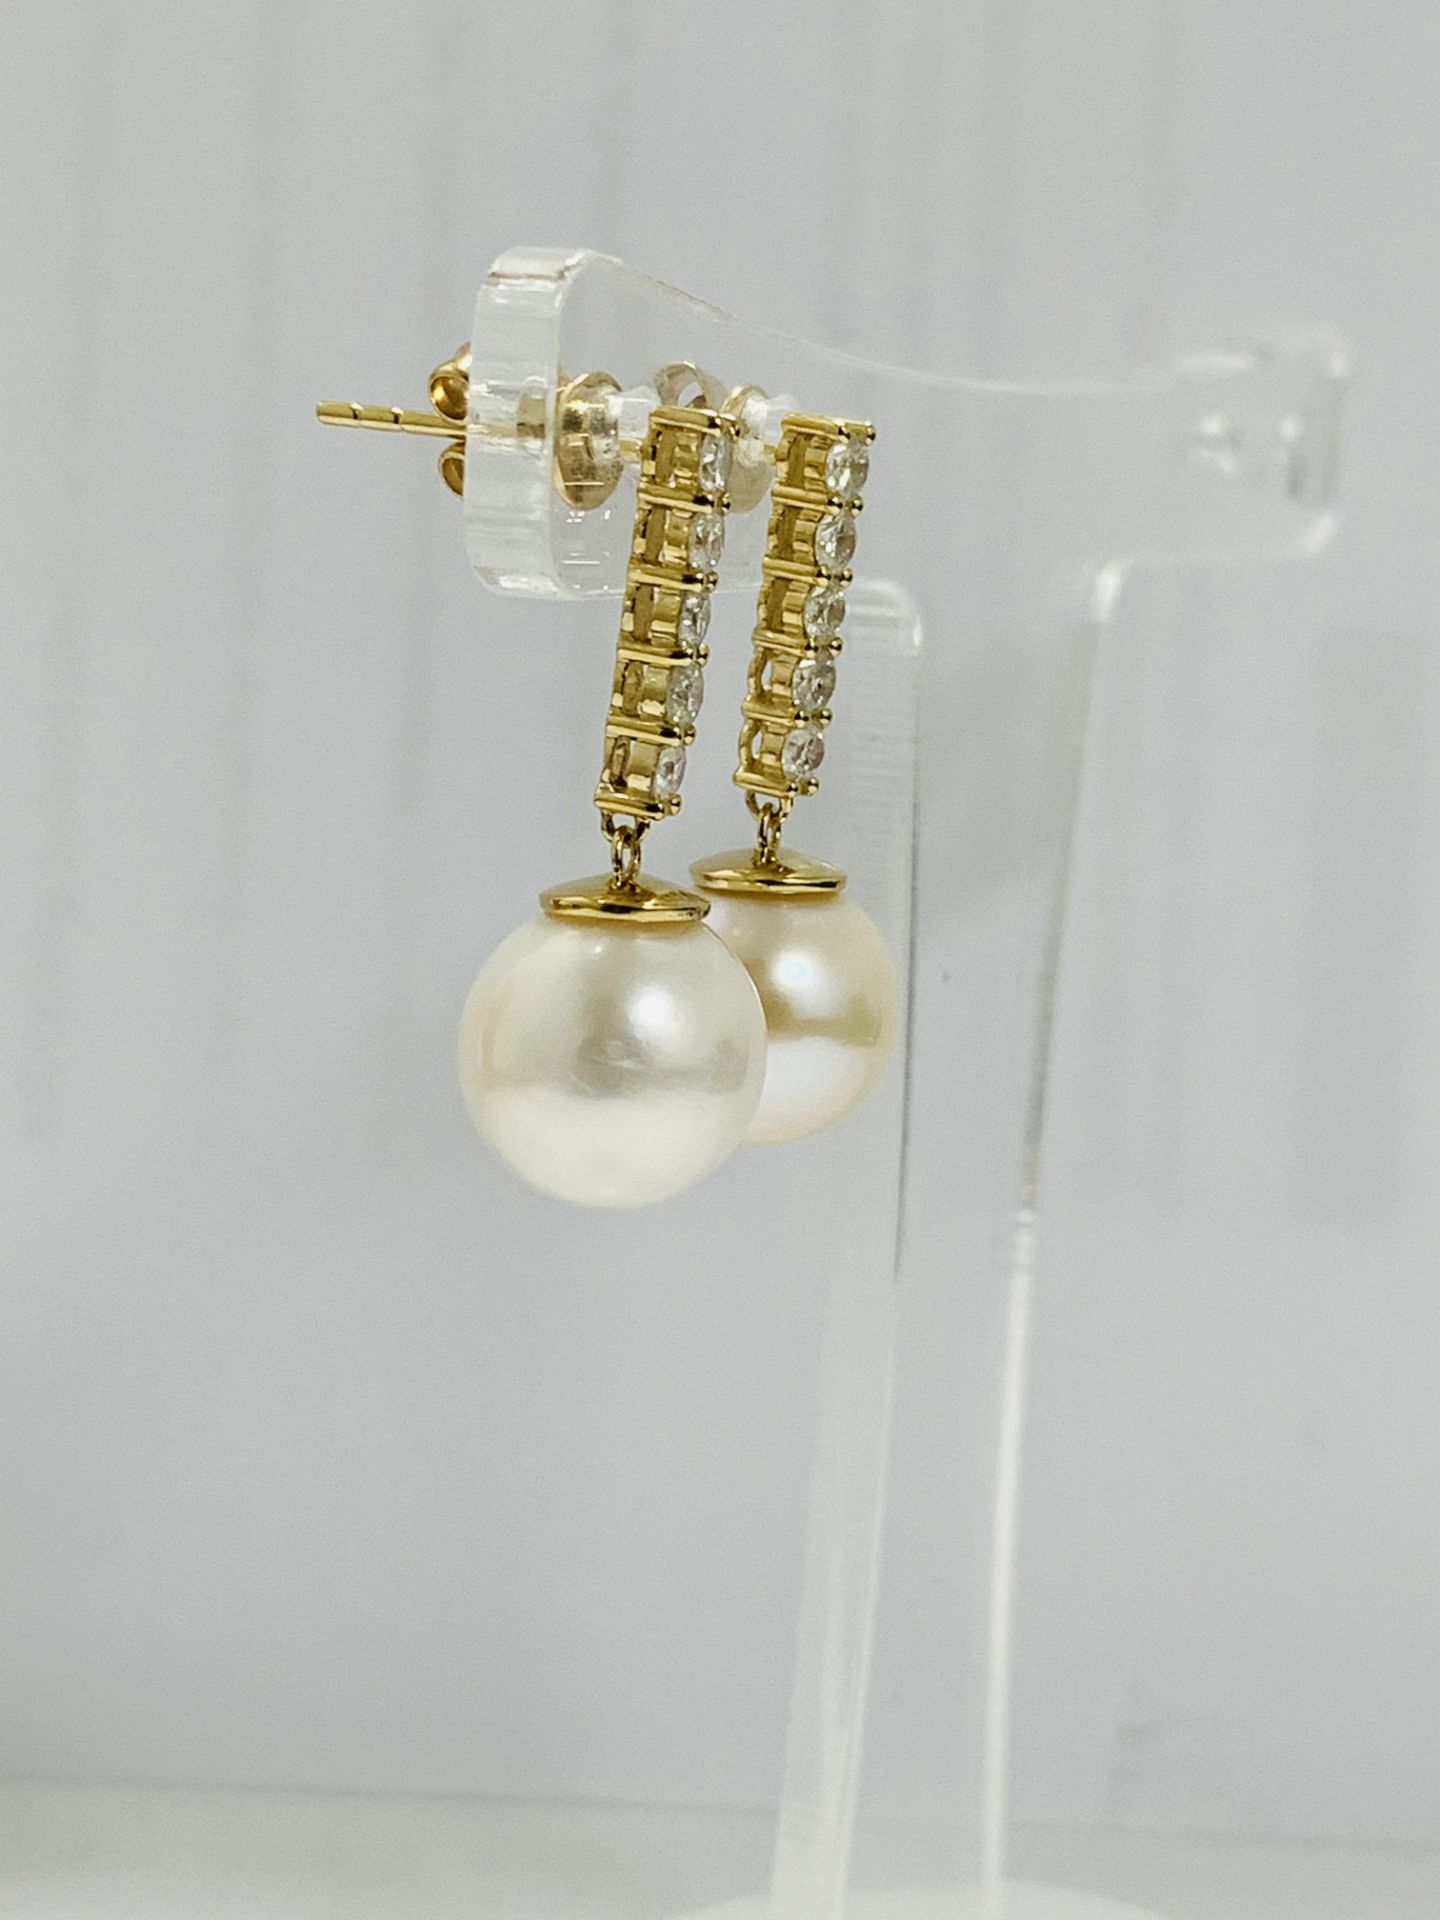 14K Yellow Gold Pair Of Earrings - Image 6 of 11